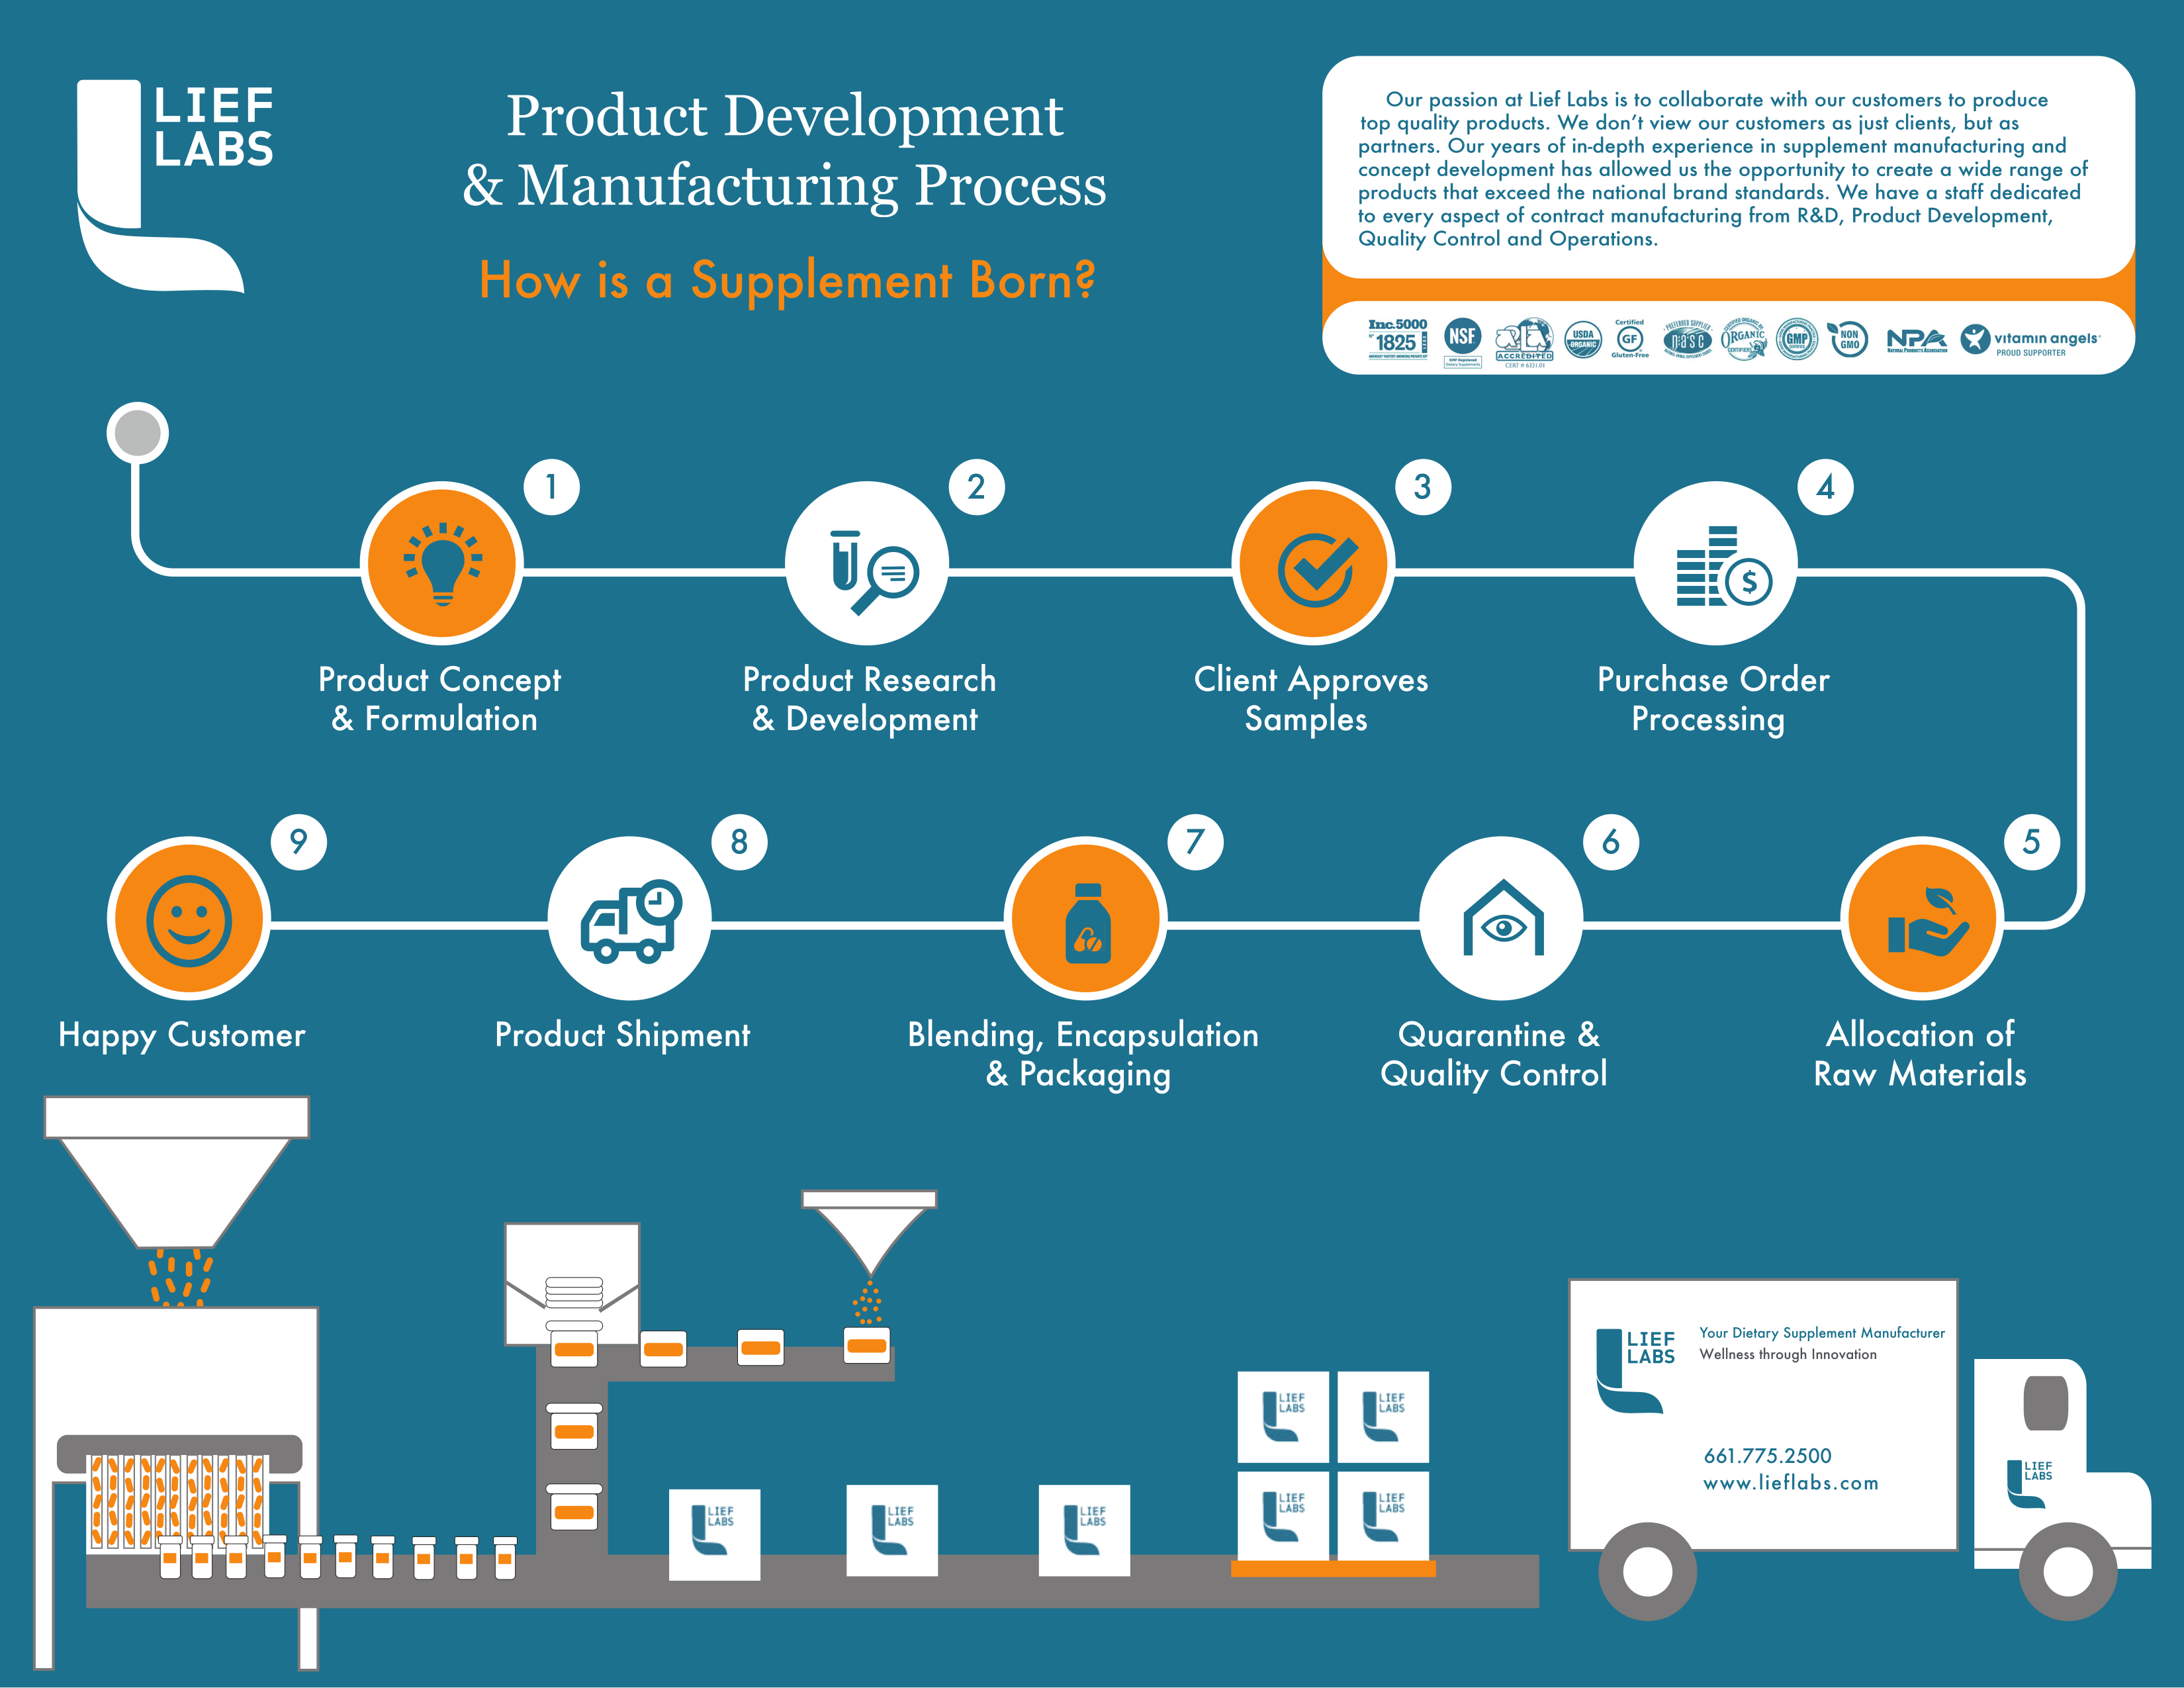 Lief Labs Product Development Process